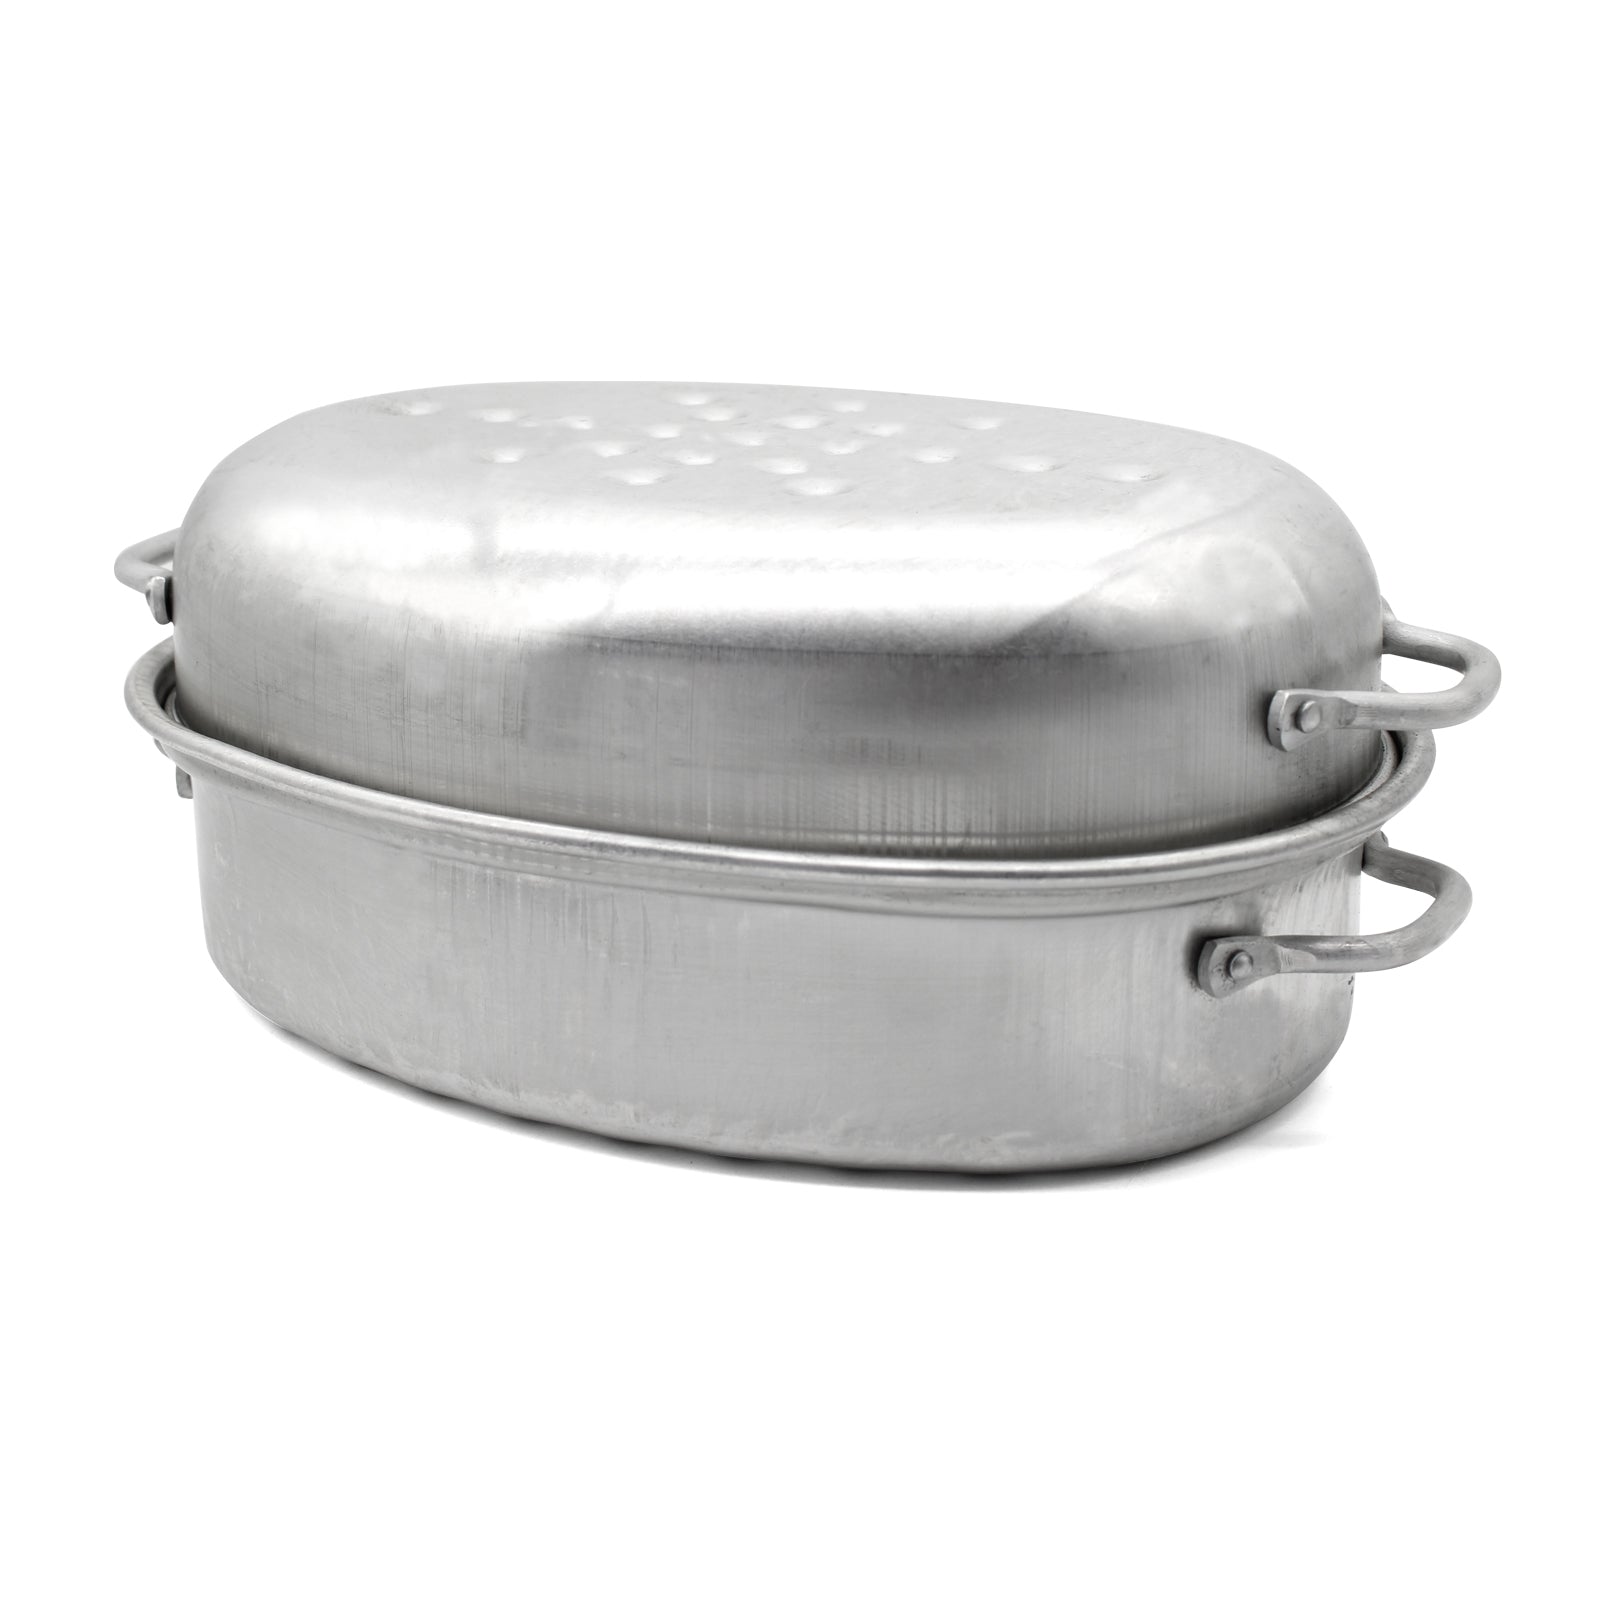 Steel Oval Casserole Dish with Secondary Dish / Lid